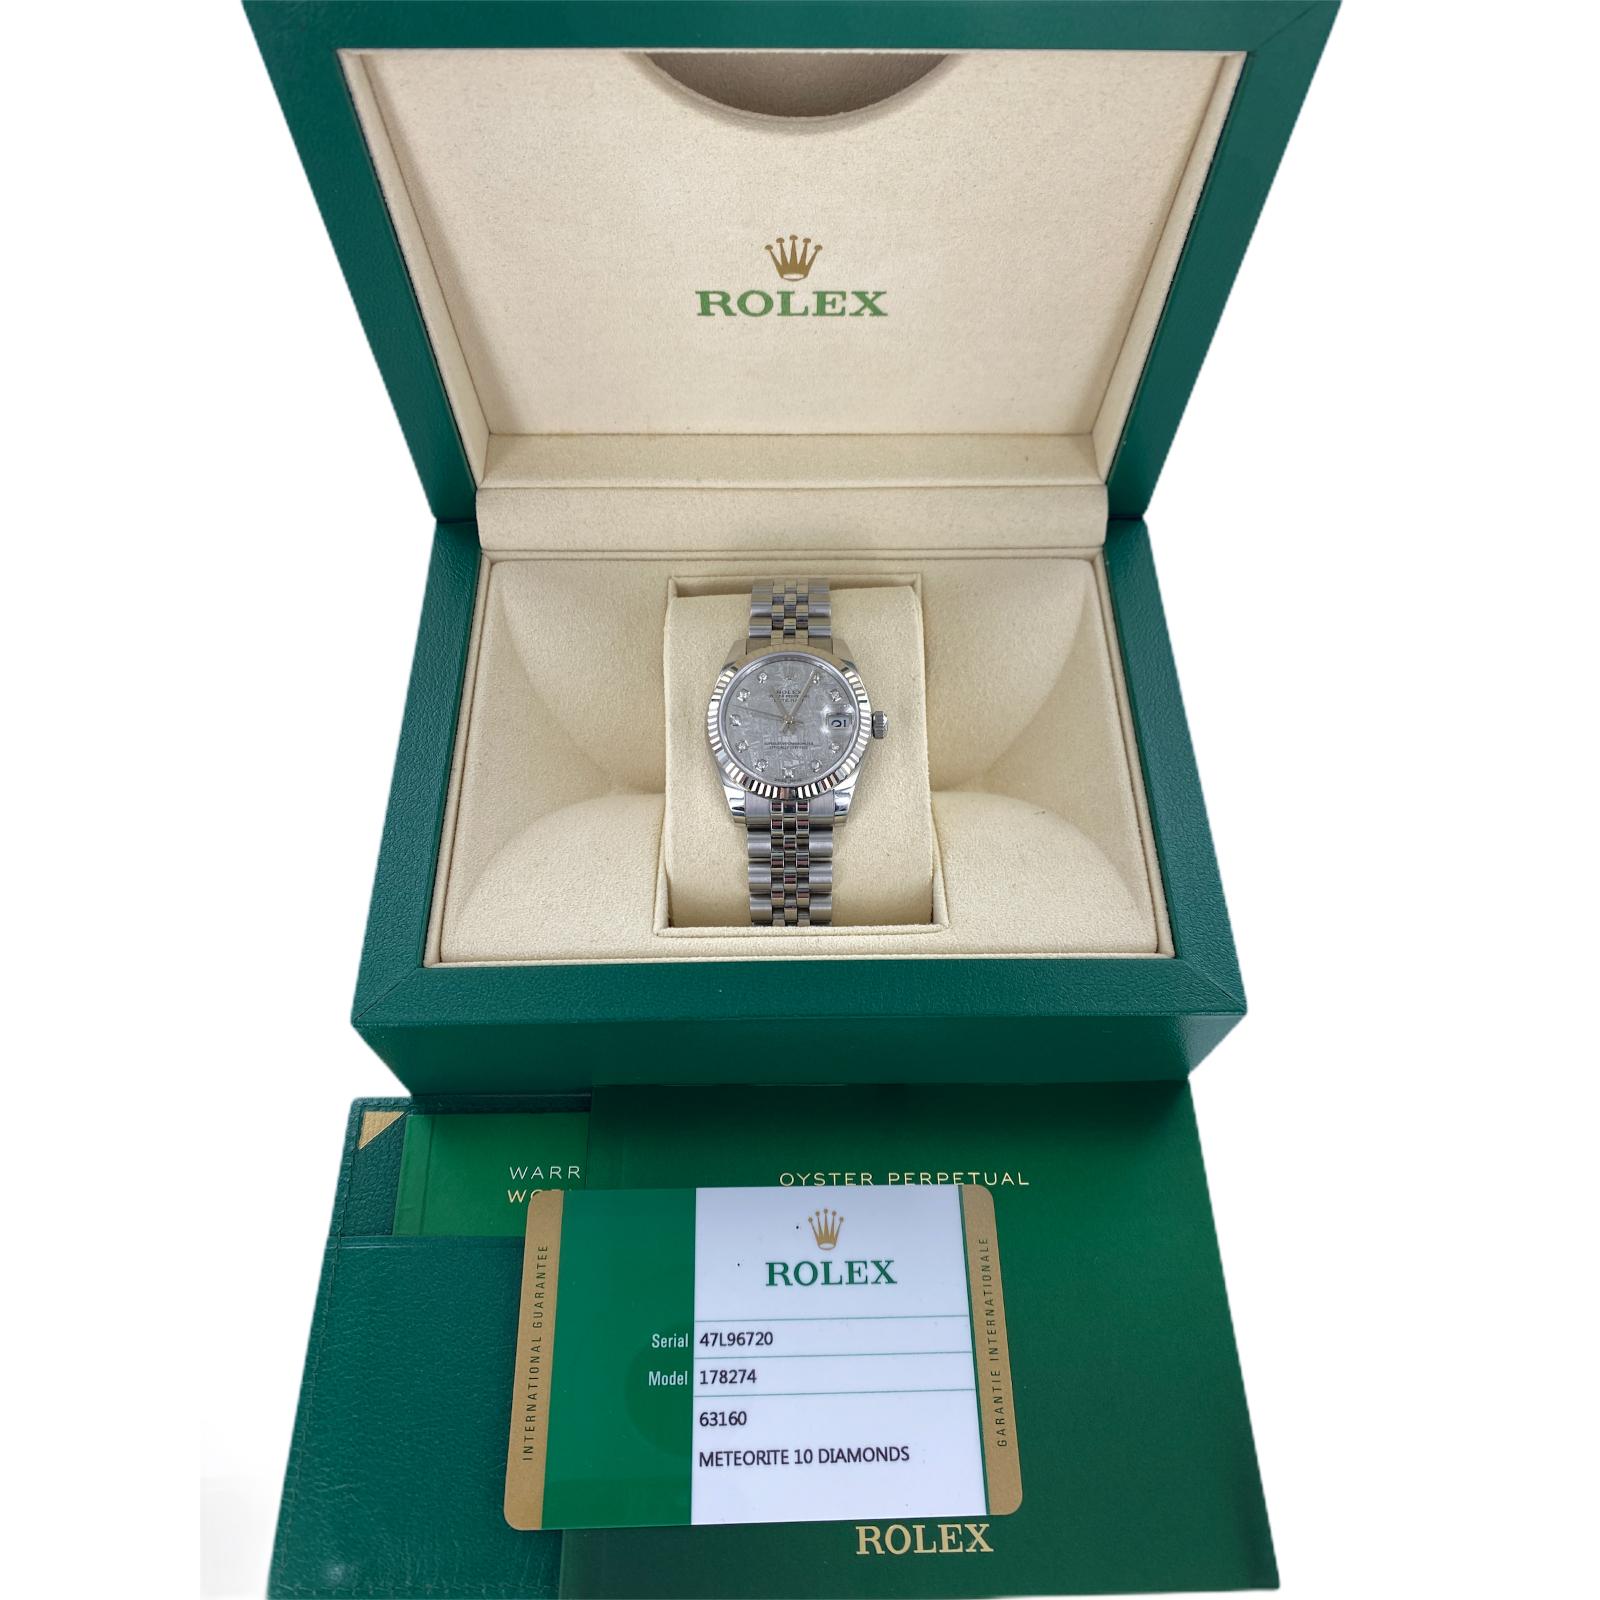 Women's Rolex Datejust Meteriote Diamond Dial Watch Box and Papers, circa 2018